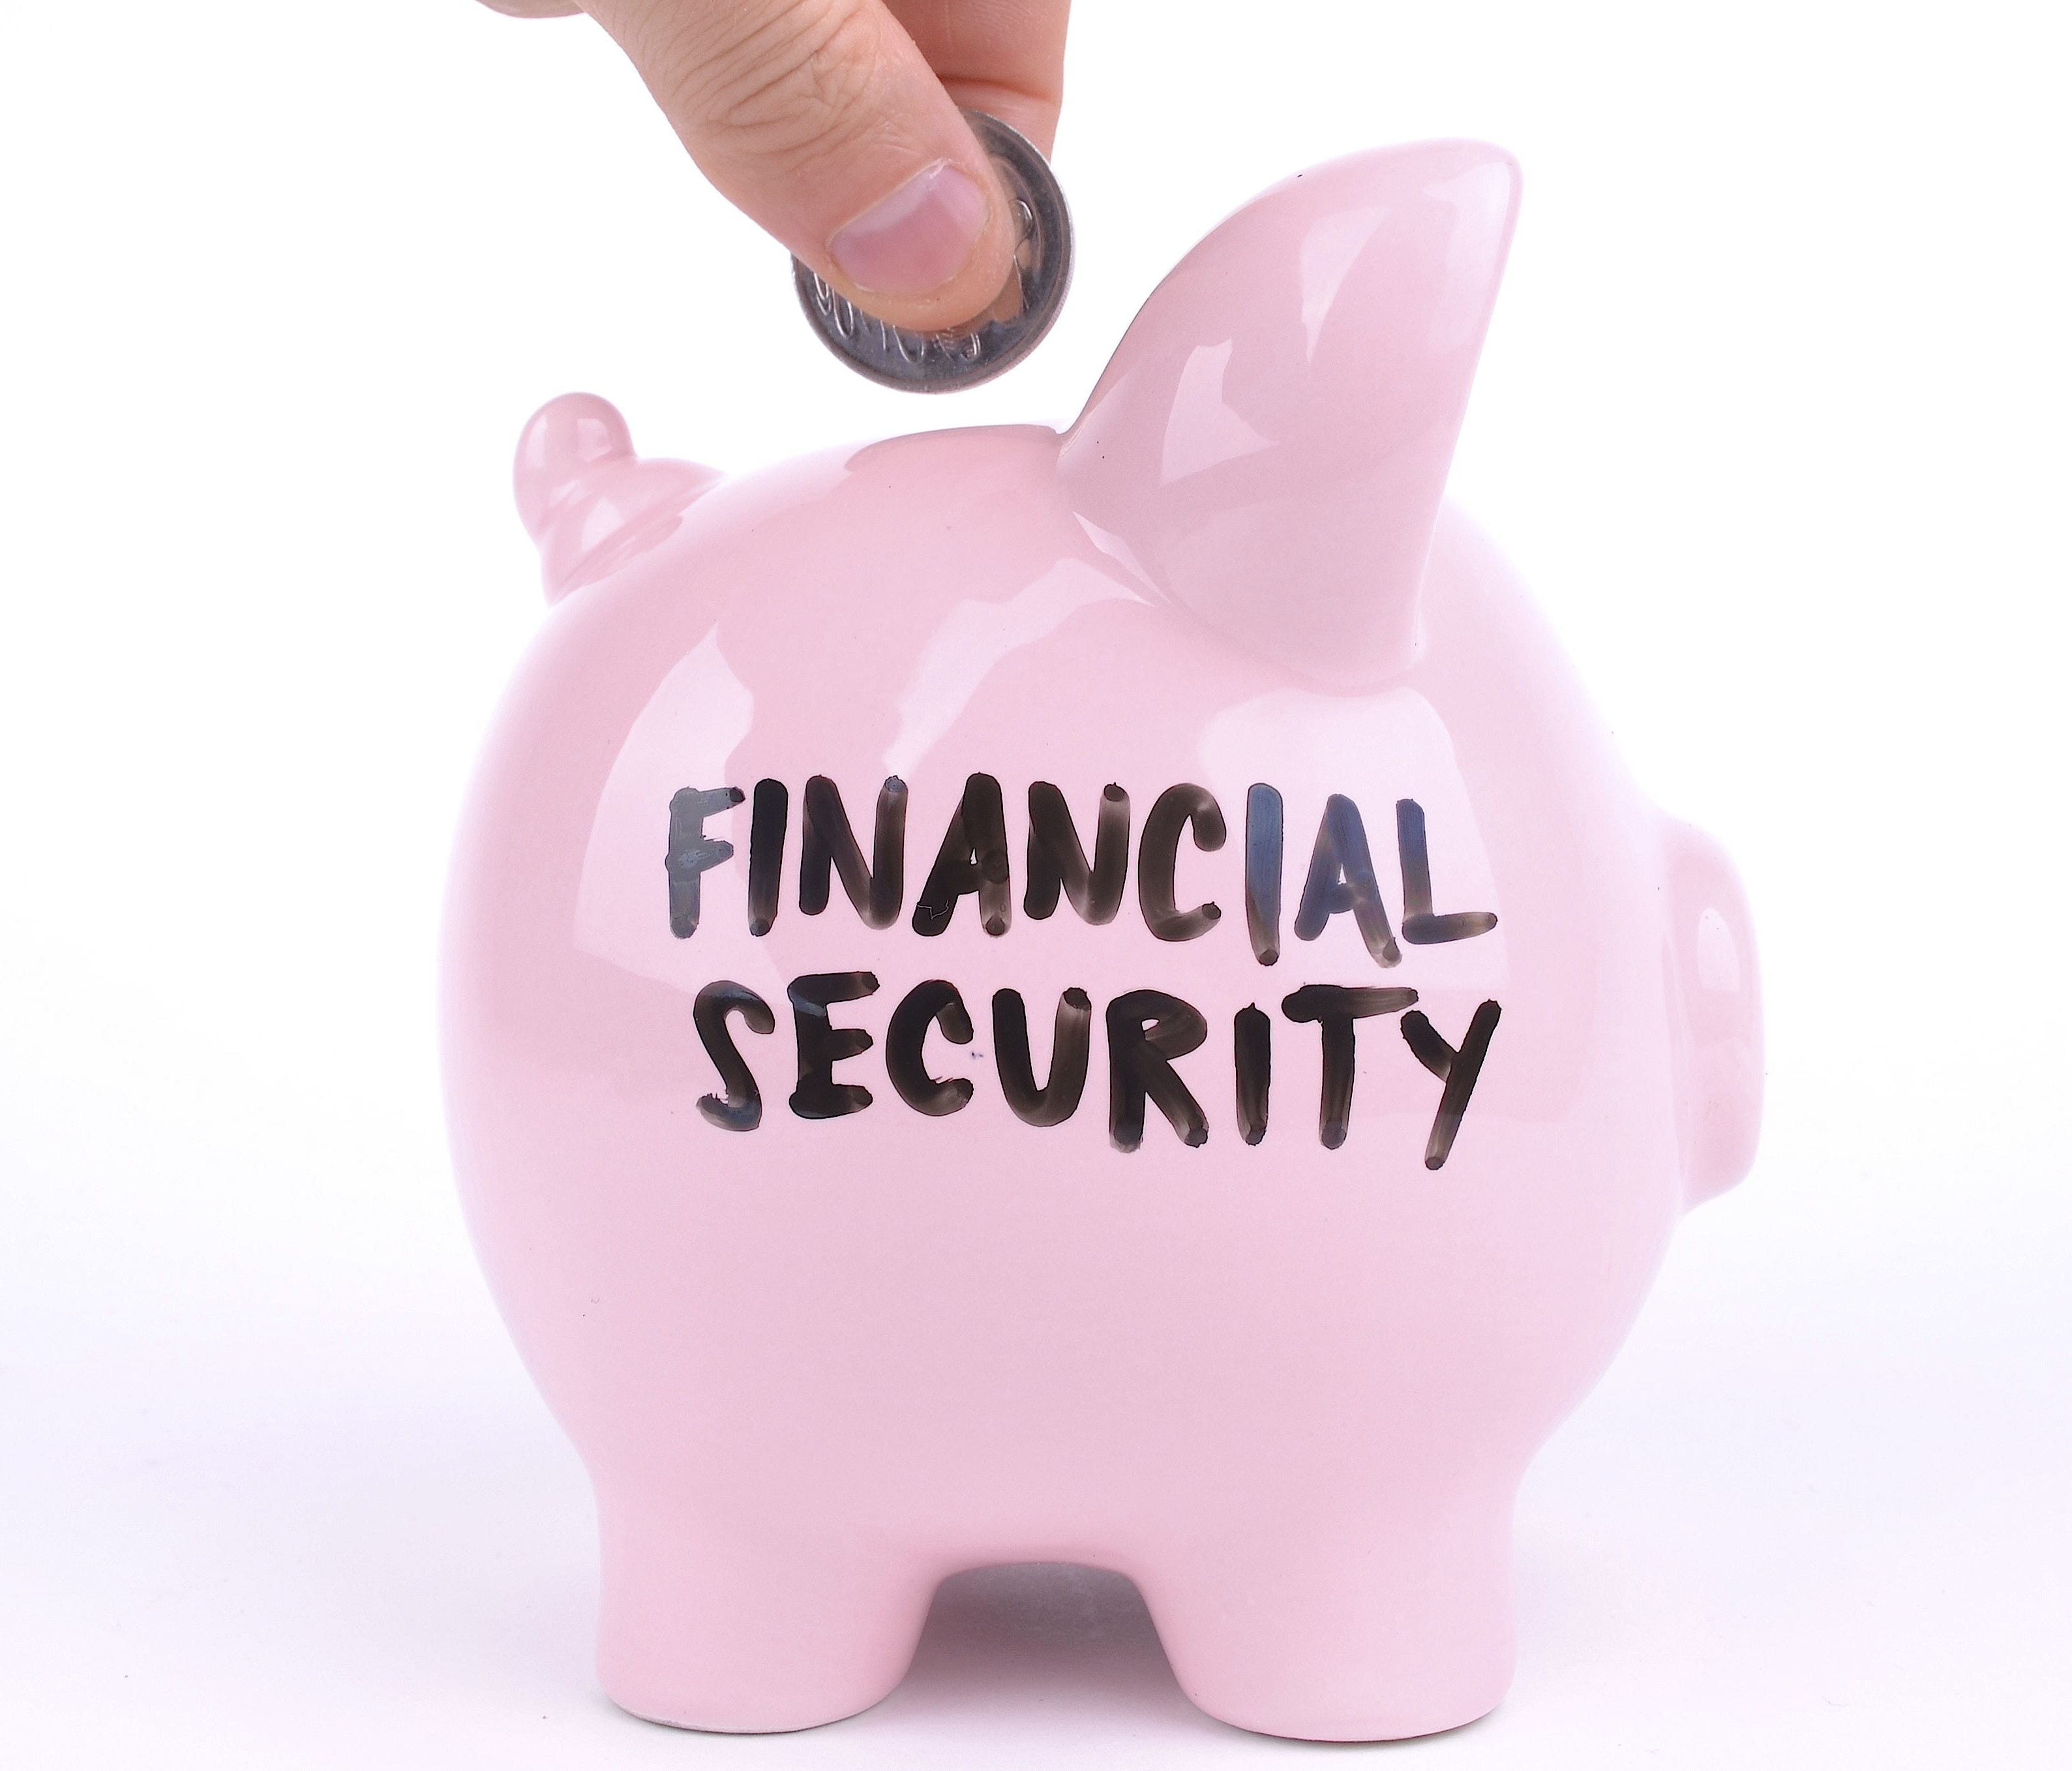 Photo illustration shows a piggy bank for saving toward retirement financial security.